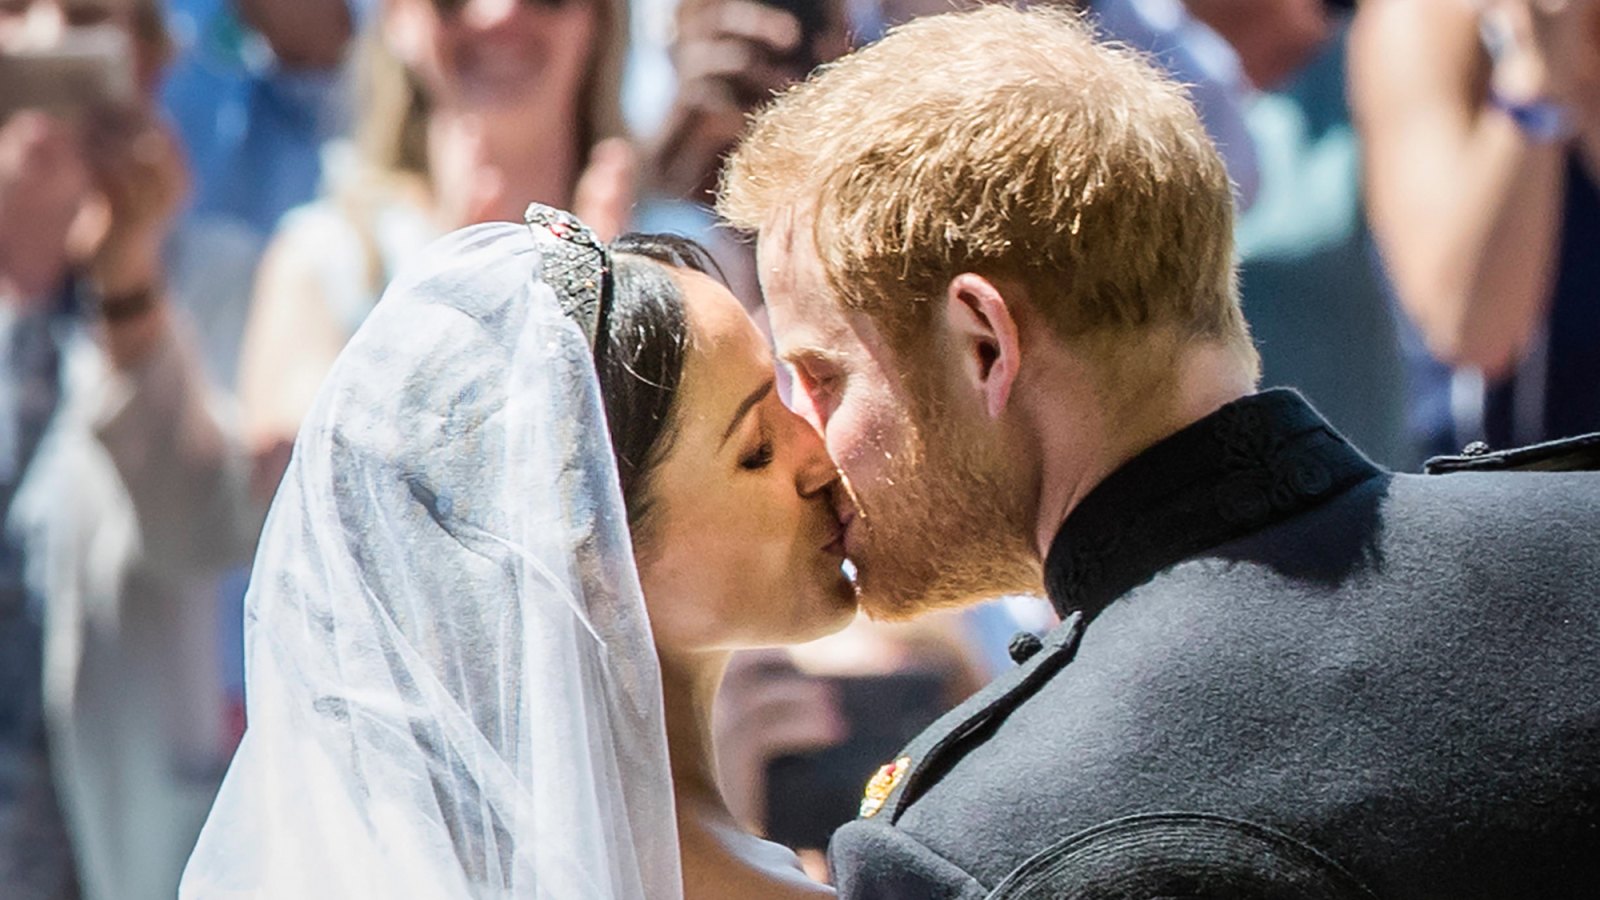 Wedding of Prince Harry and Meghan Markle, at St George's Chapel at Windsor Castle in Berkshire